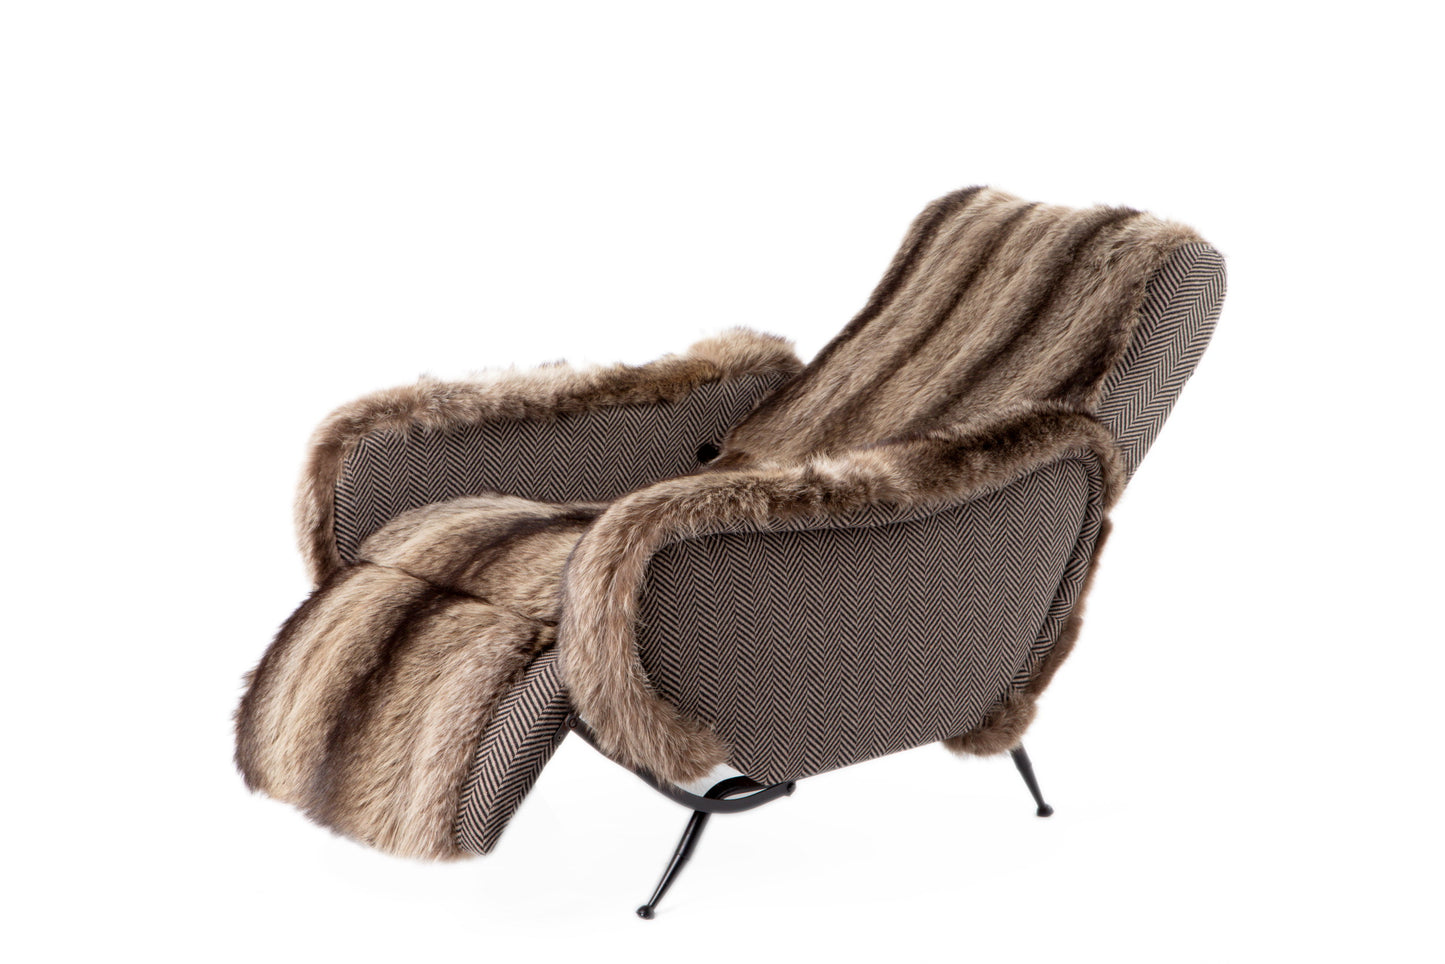 Lady armchair from the 50s in fabric and fur